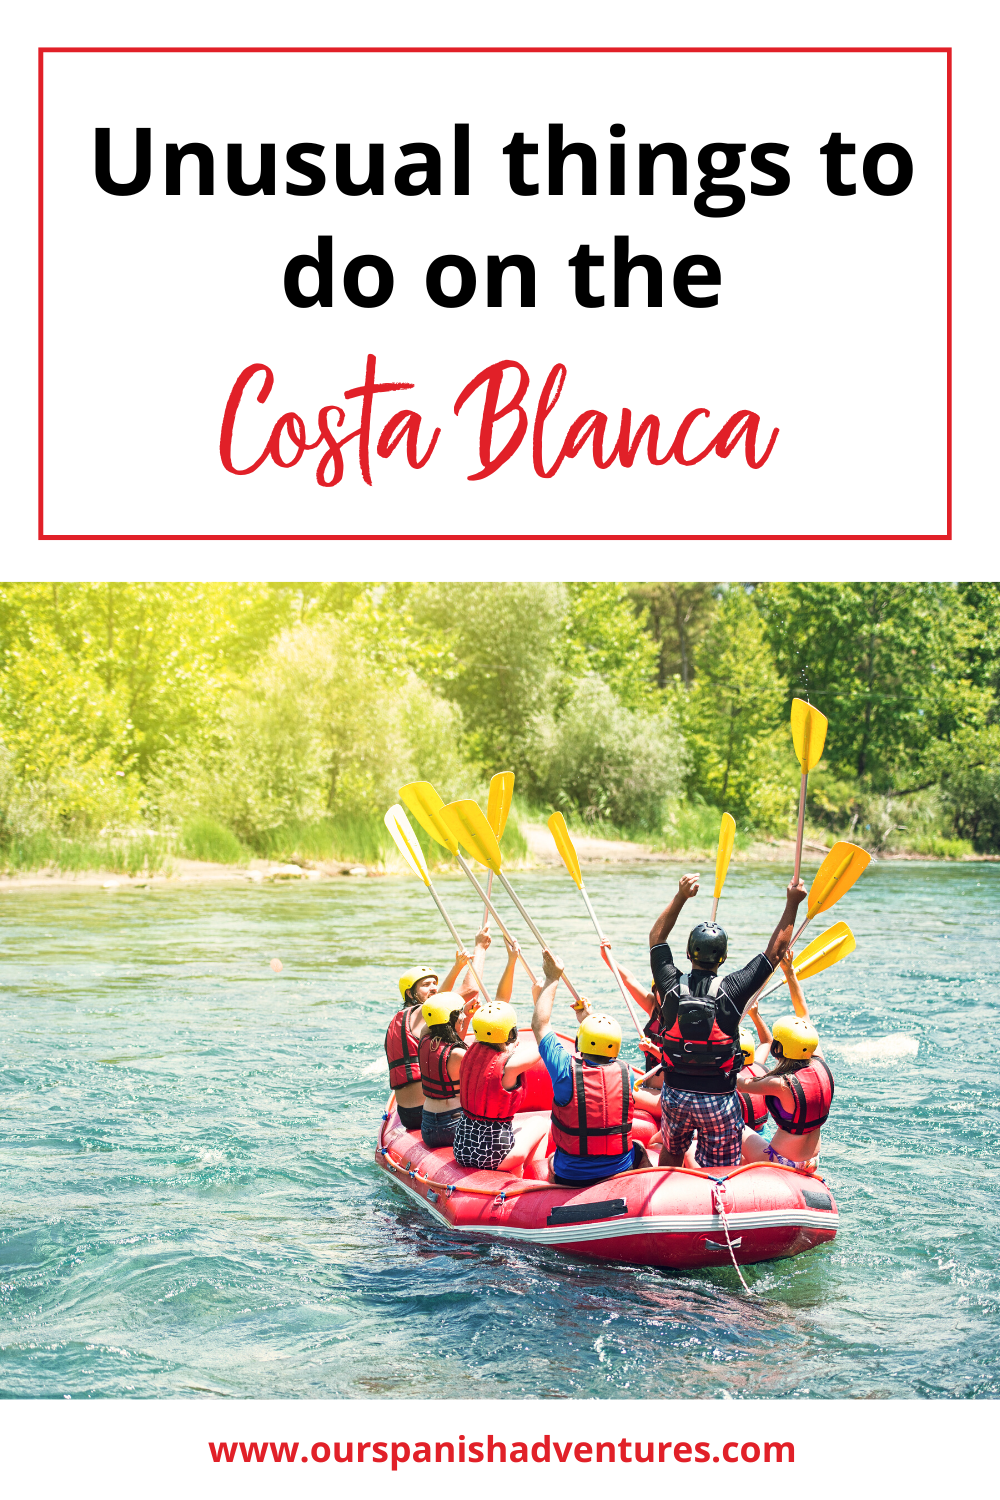 Unusual things to do on the Costa Blanca | Our Spanish Adventures